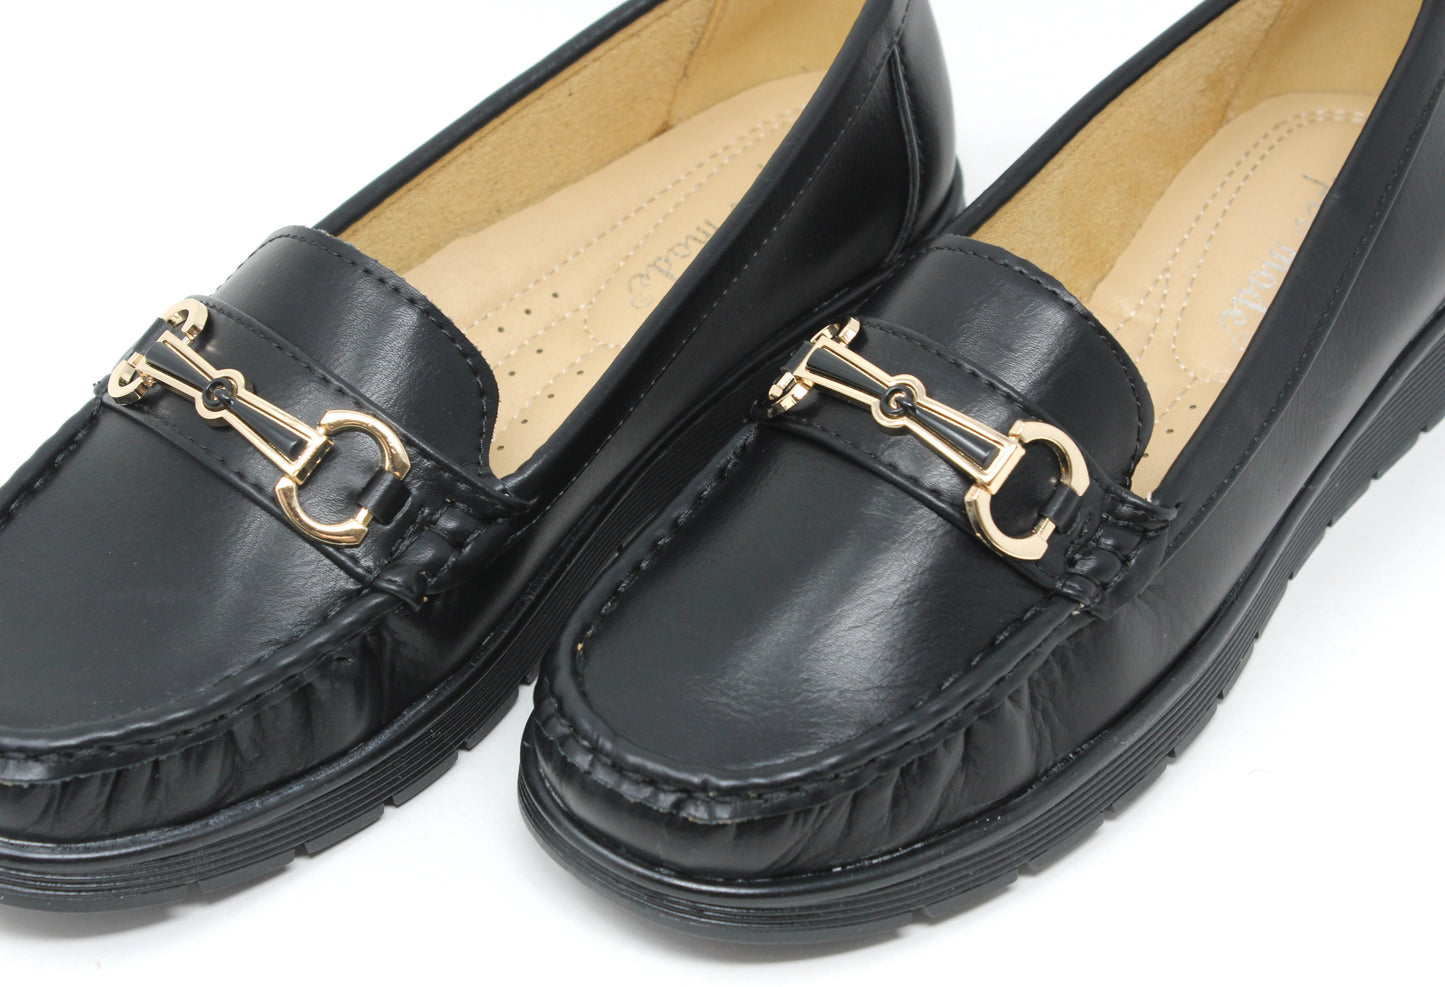 Faux Leather Loafer